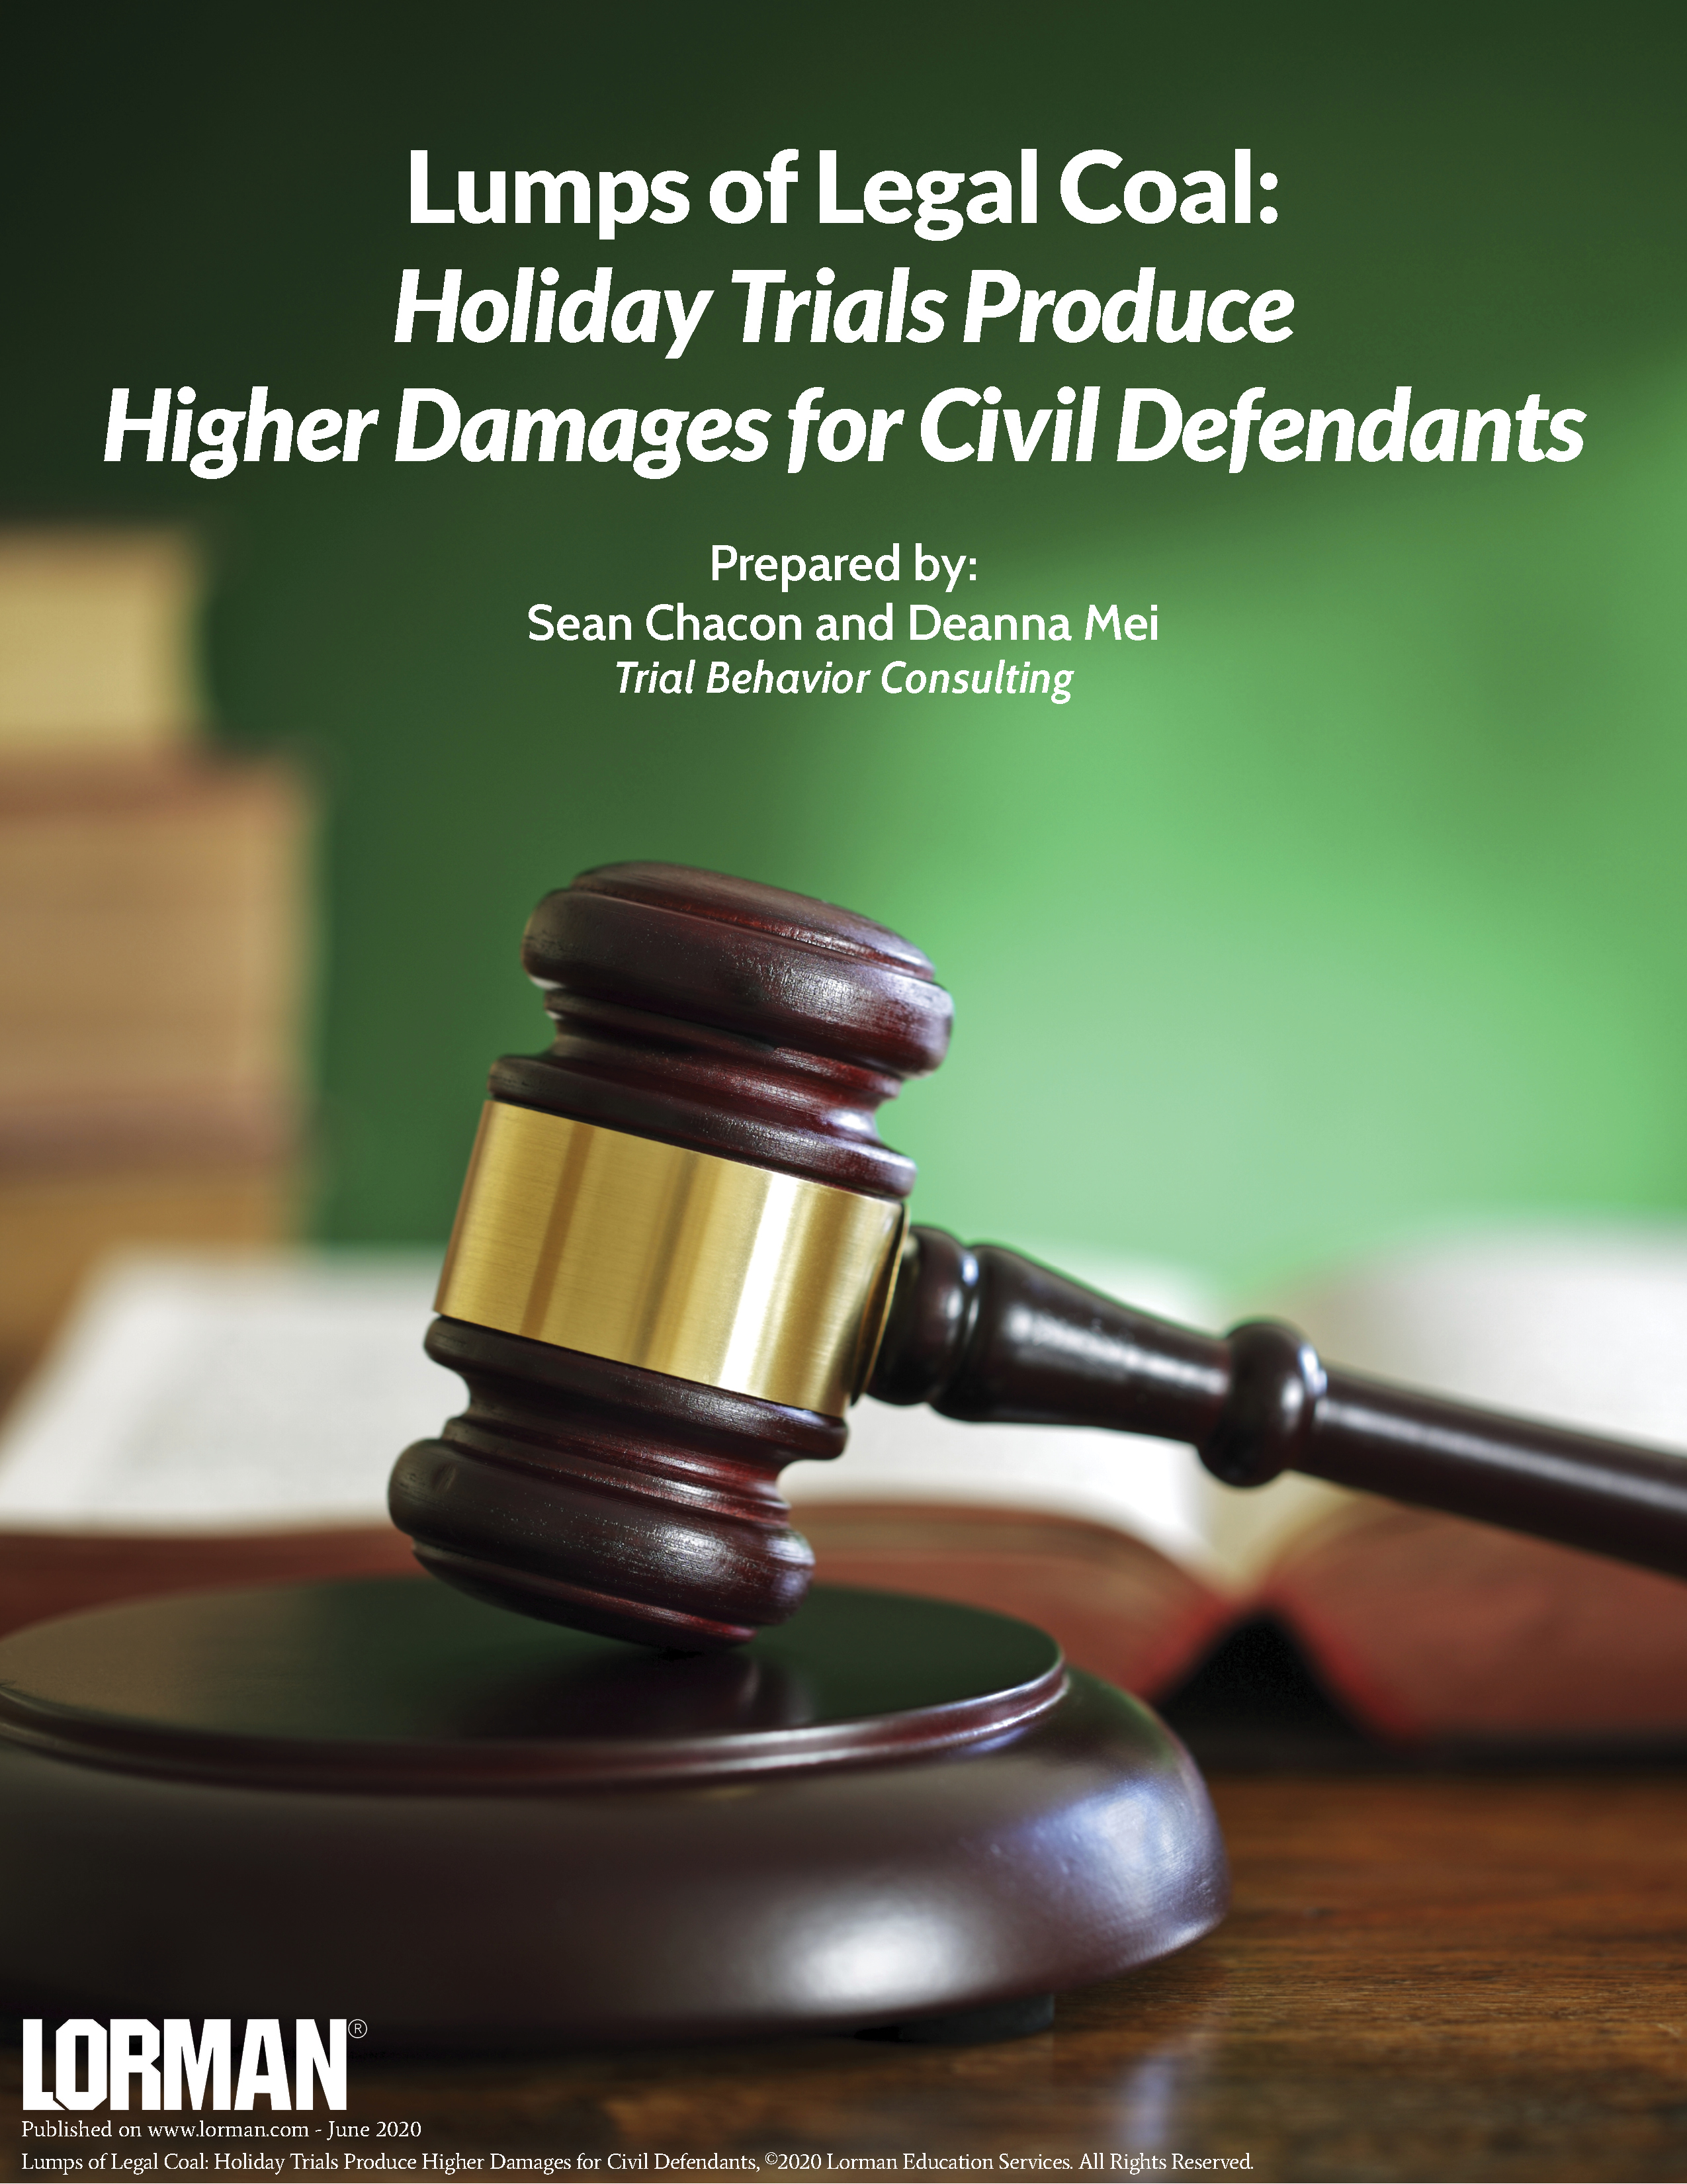 Lumps of Legal Coal: Holiday Trials Produce Higher Damages for Civil Defendants